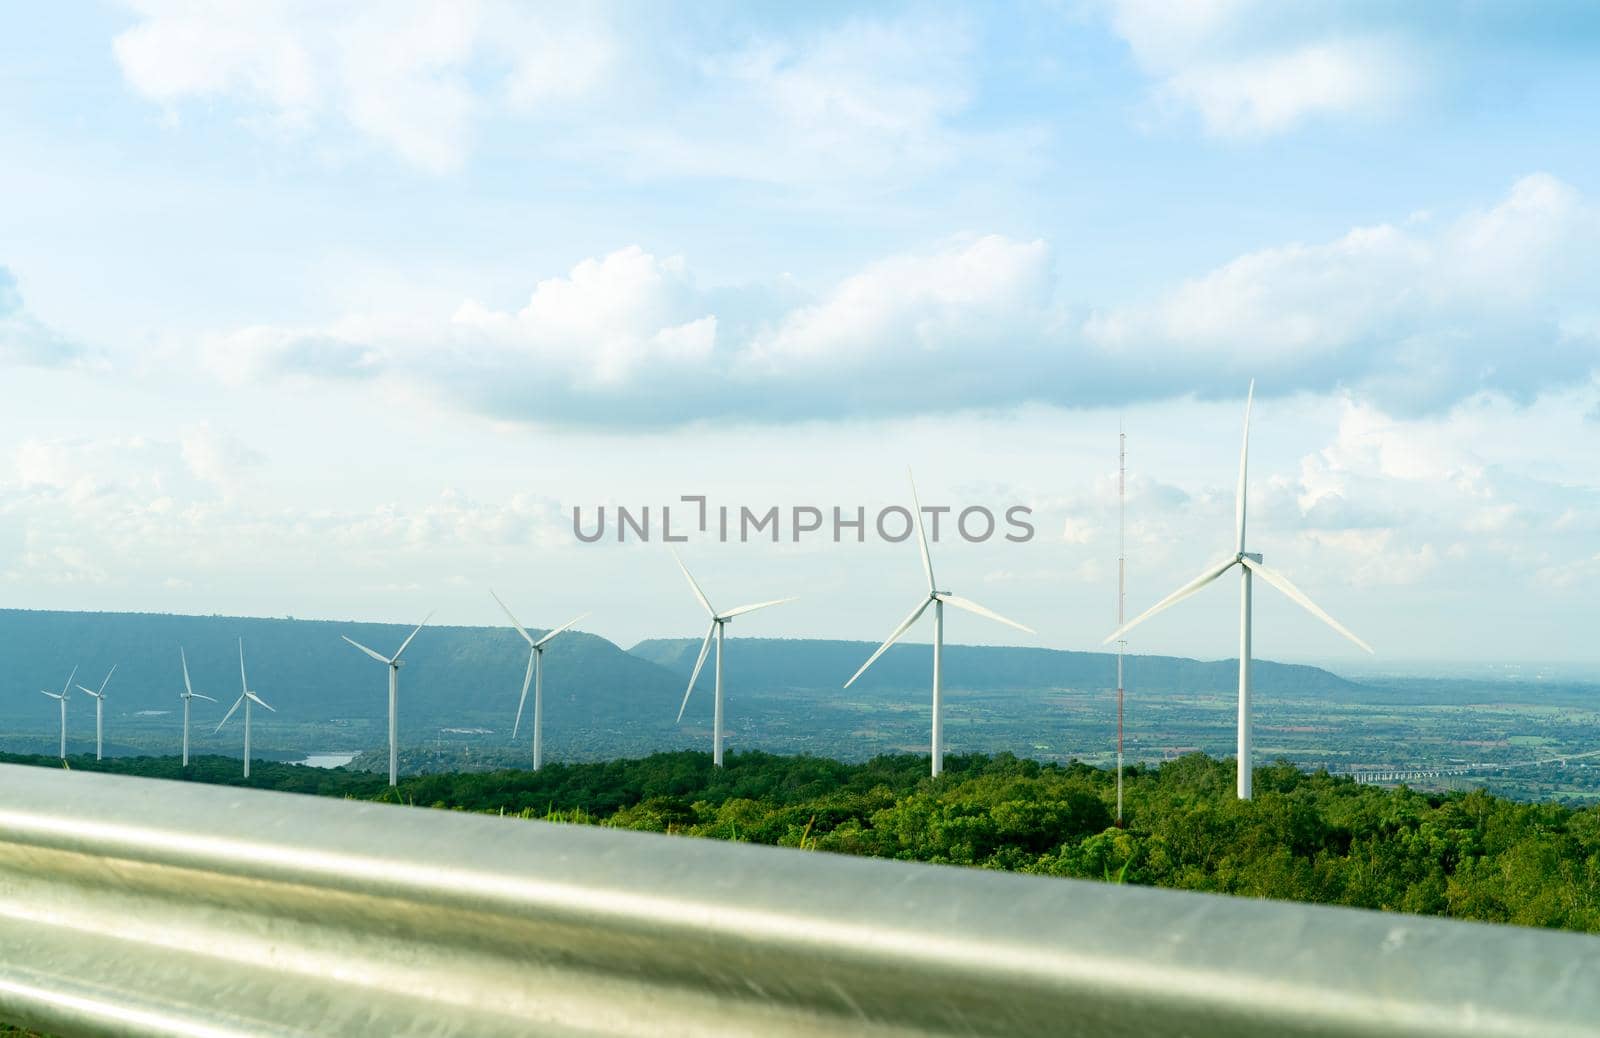 Wind energy. Wind power. Sustainable, renewable energy. Wind turbines generate electricity. Windmill farm on a mountain with blue sky. Green technology. Renewable resource. Sustainable development.